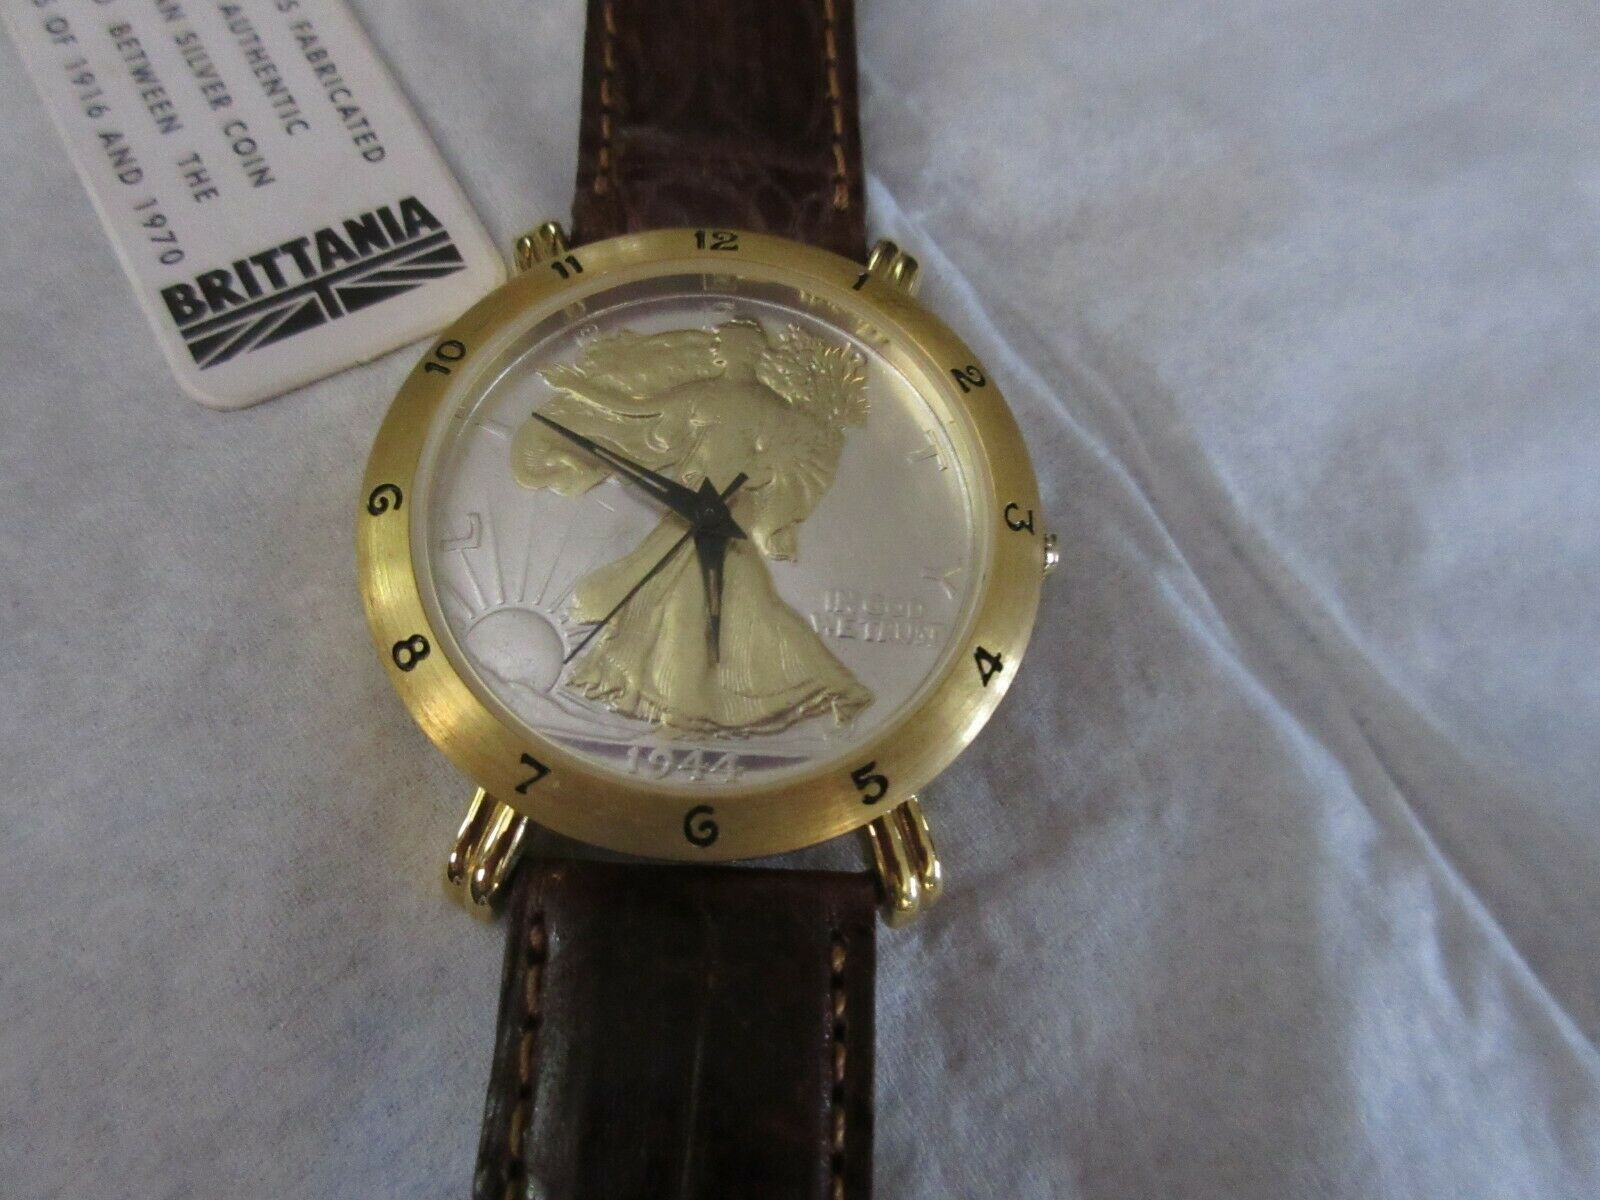 Stylish Vintage Brittania Watch from the 90s